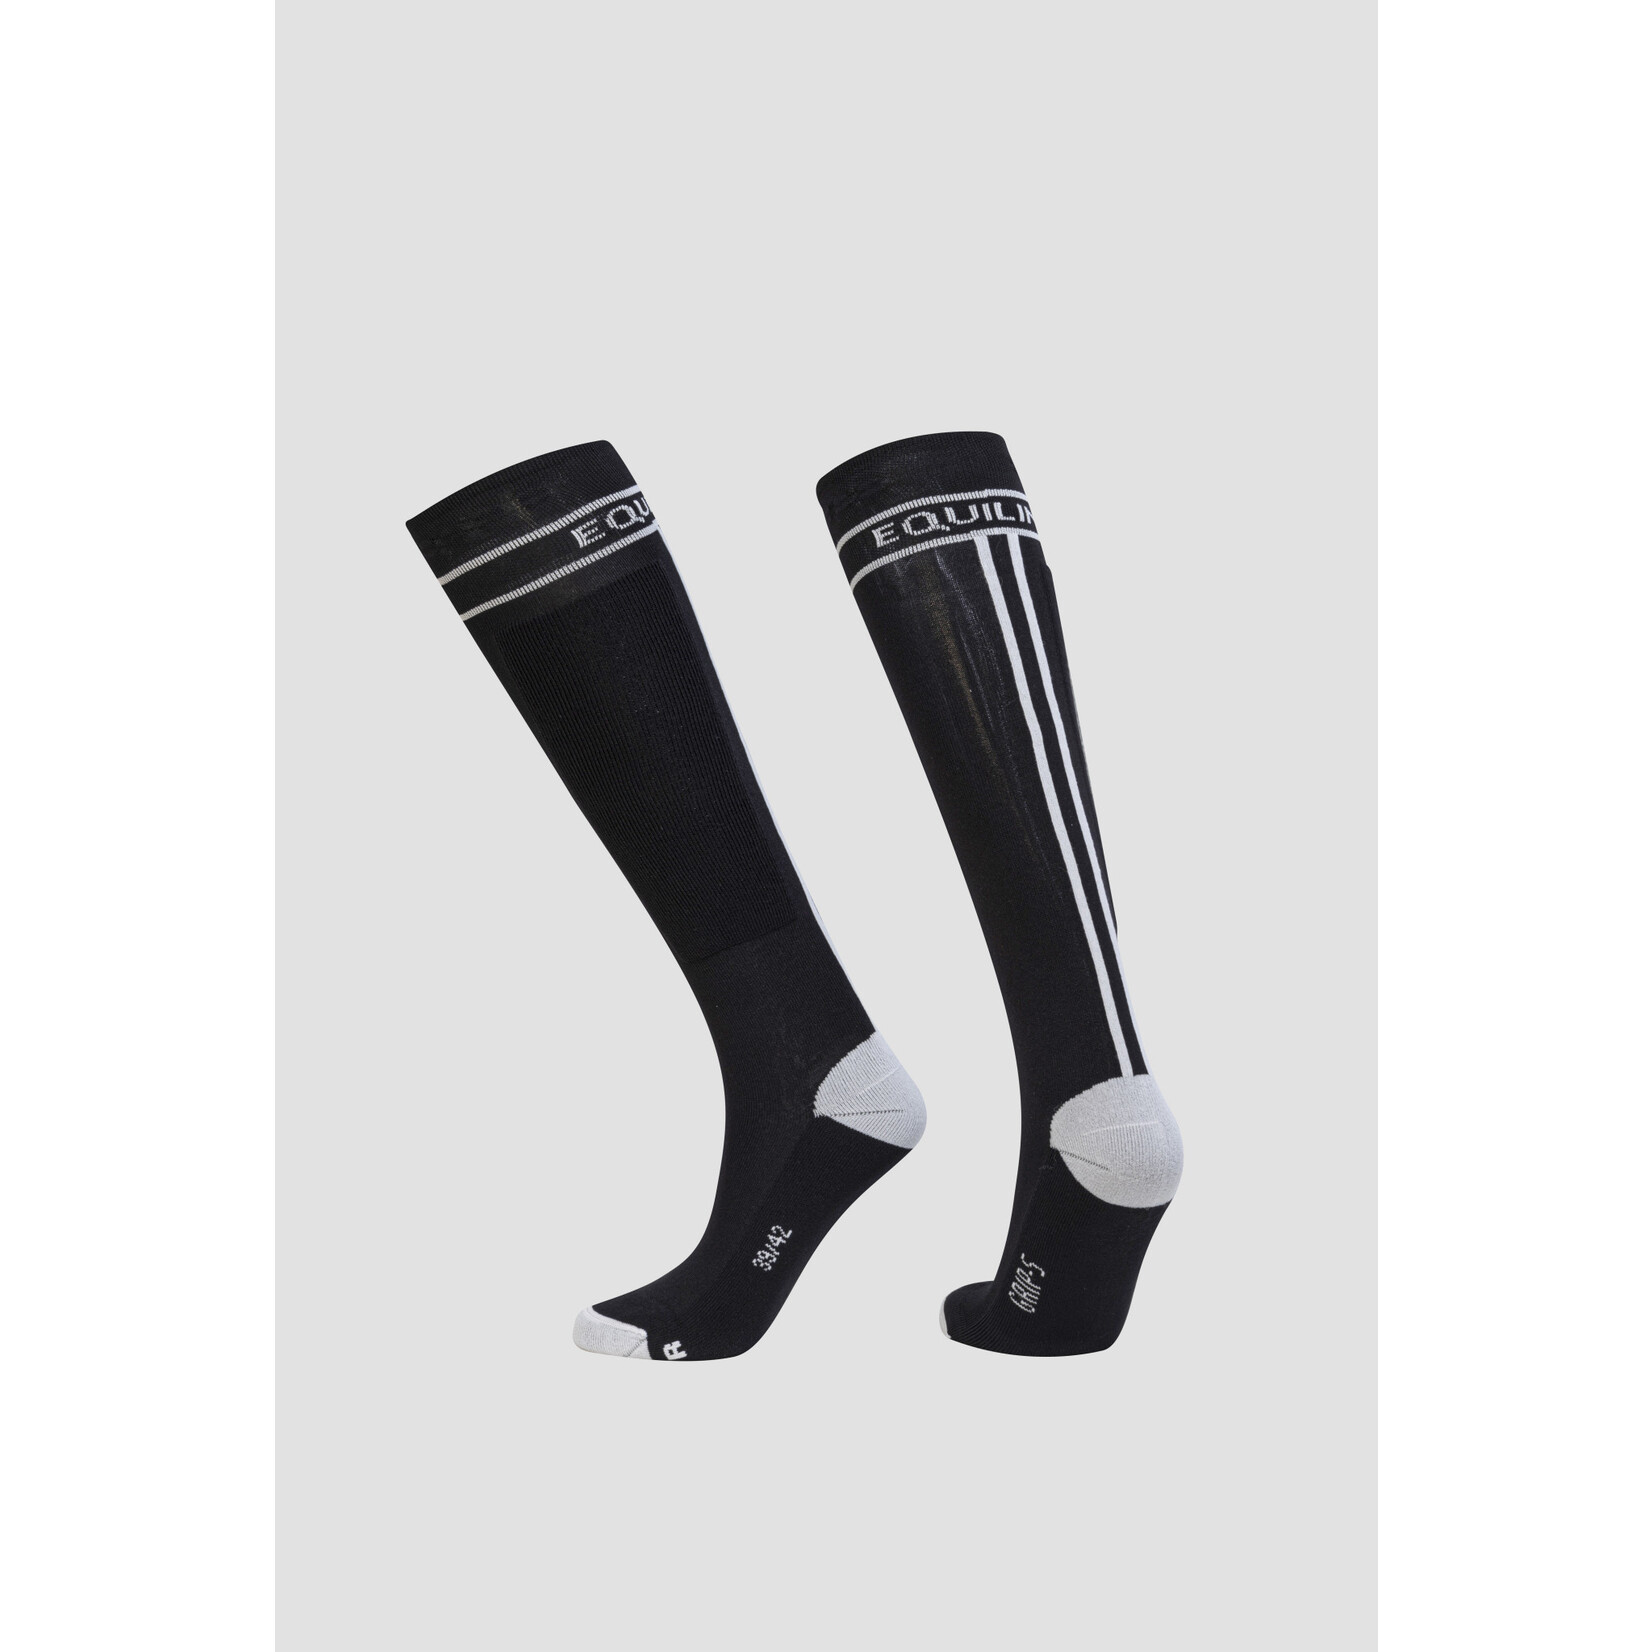 Equiline Equiline Cirec Riding Socks